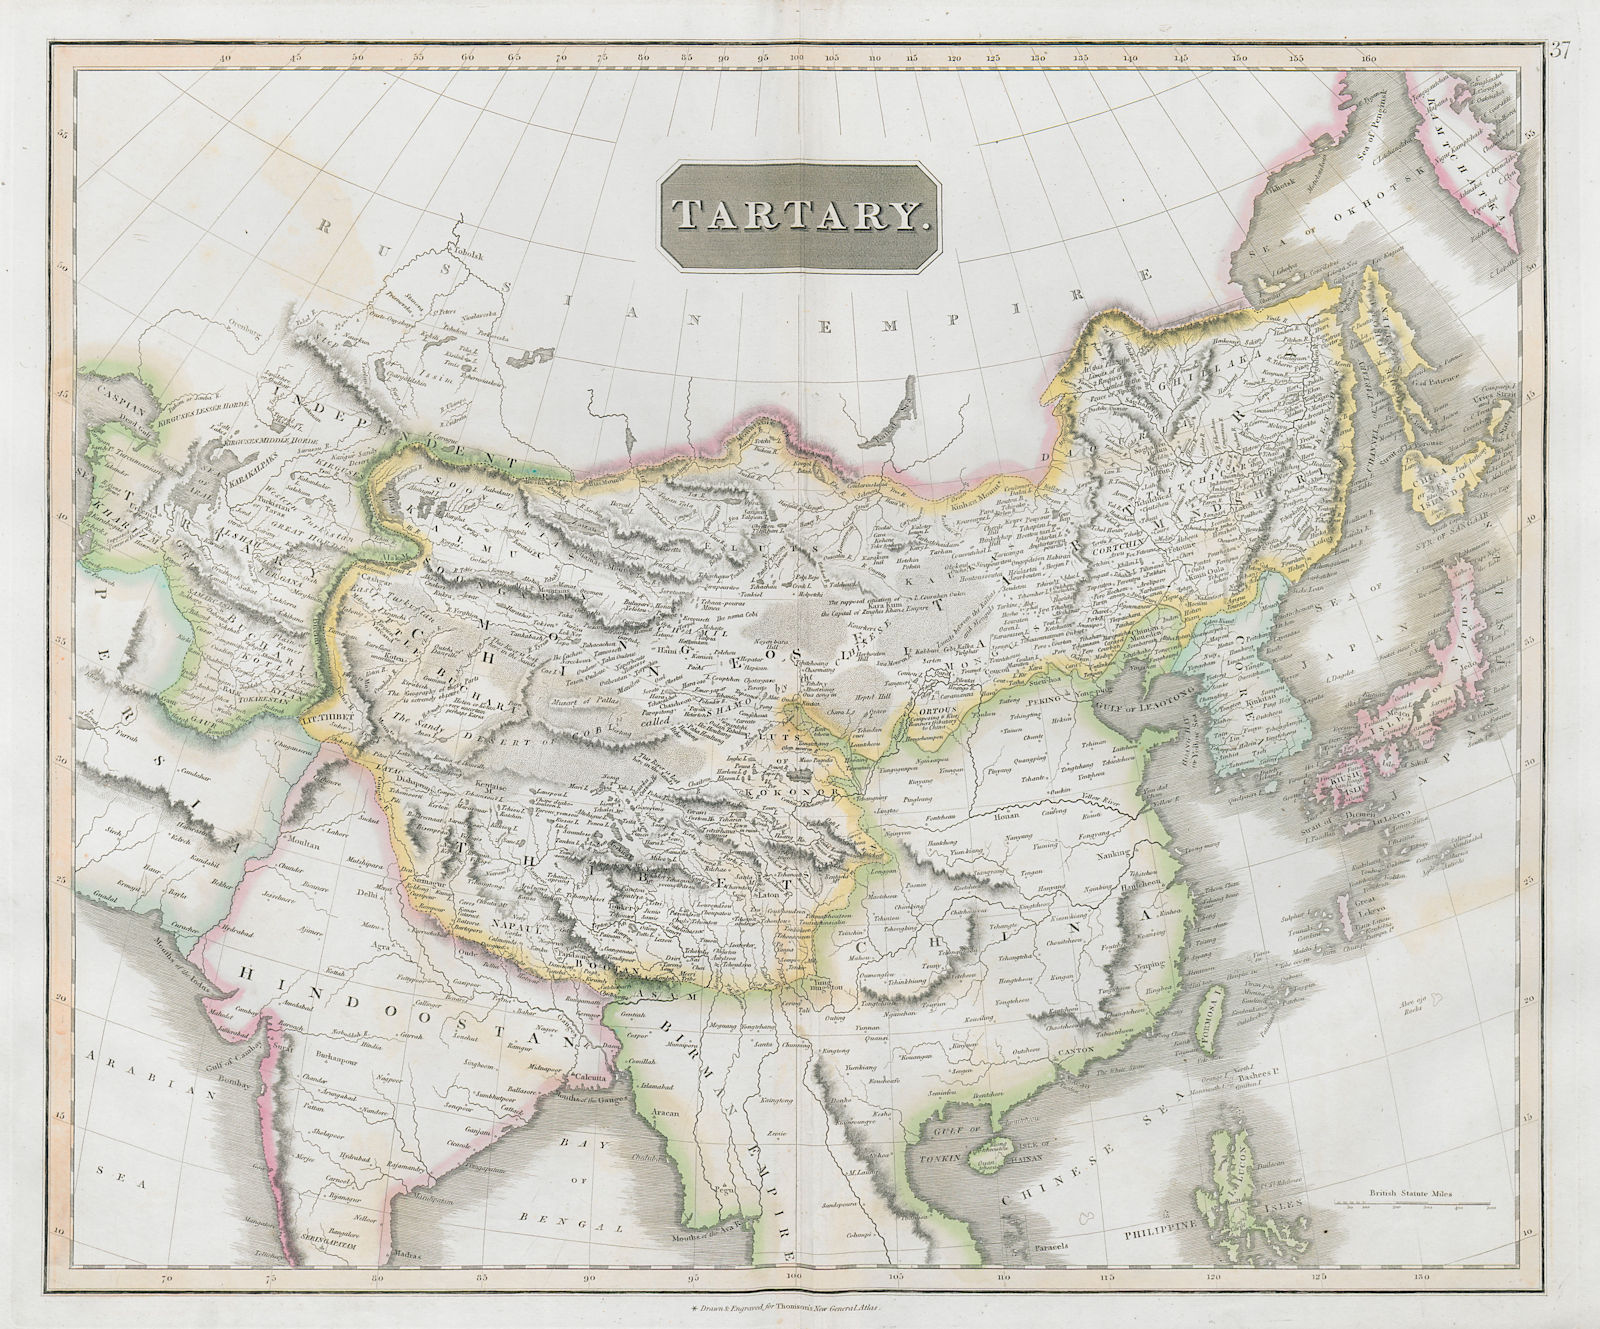 Independent & Chinese "Tartary". Central Asia Tibet Silk Road. THOMSON 1830 map